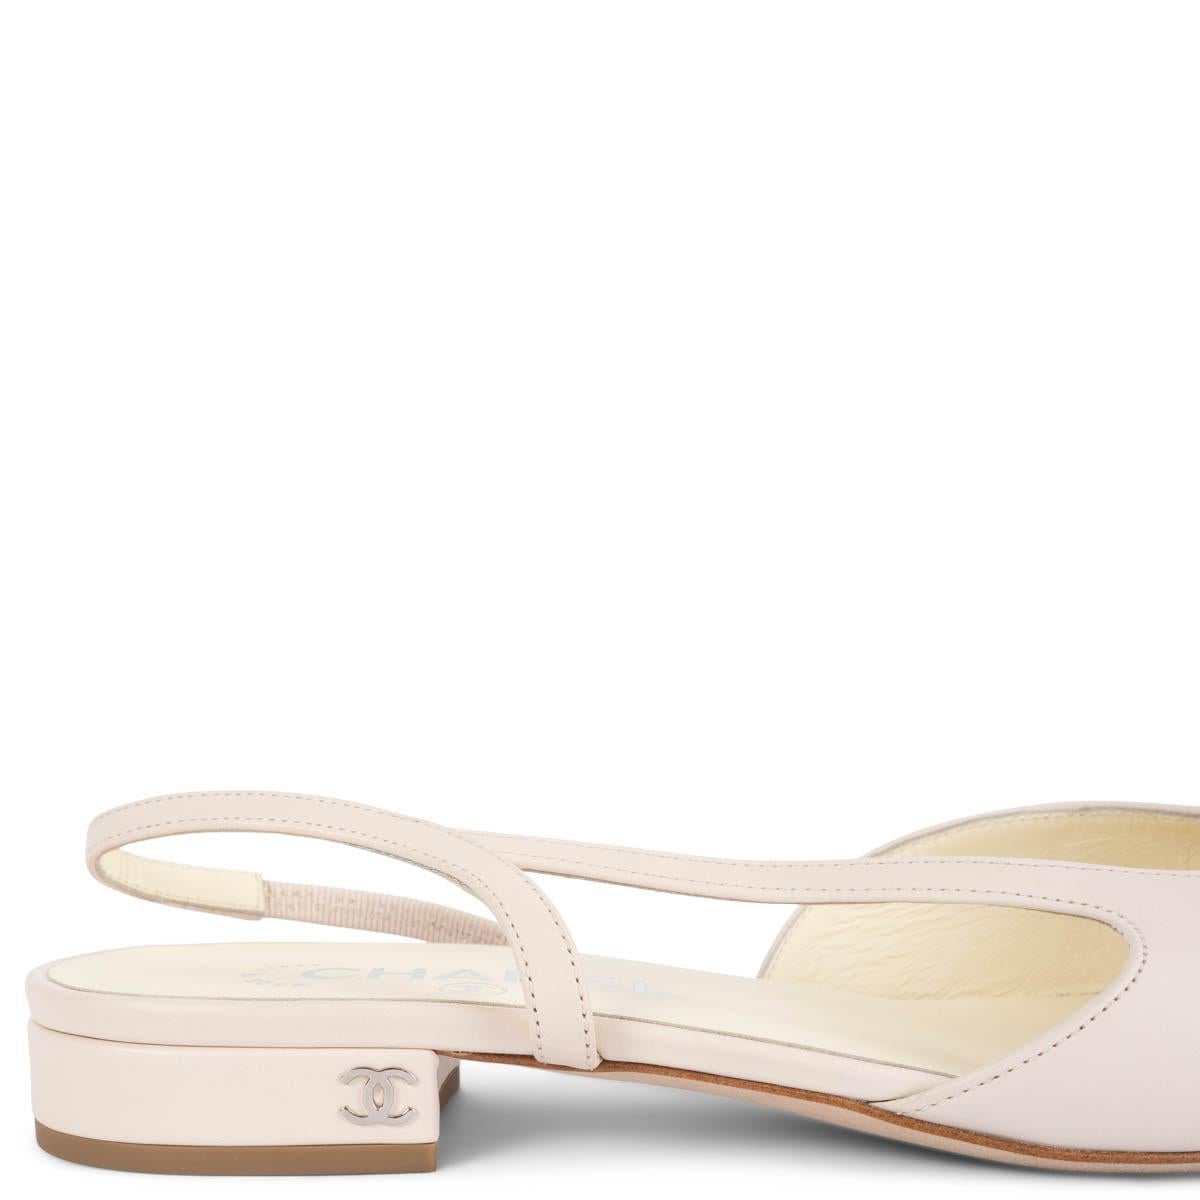 Women's CHANEL ivory & coral leather 2020 20C Slingbacks Flats Shoes 38.5